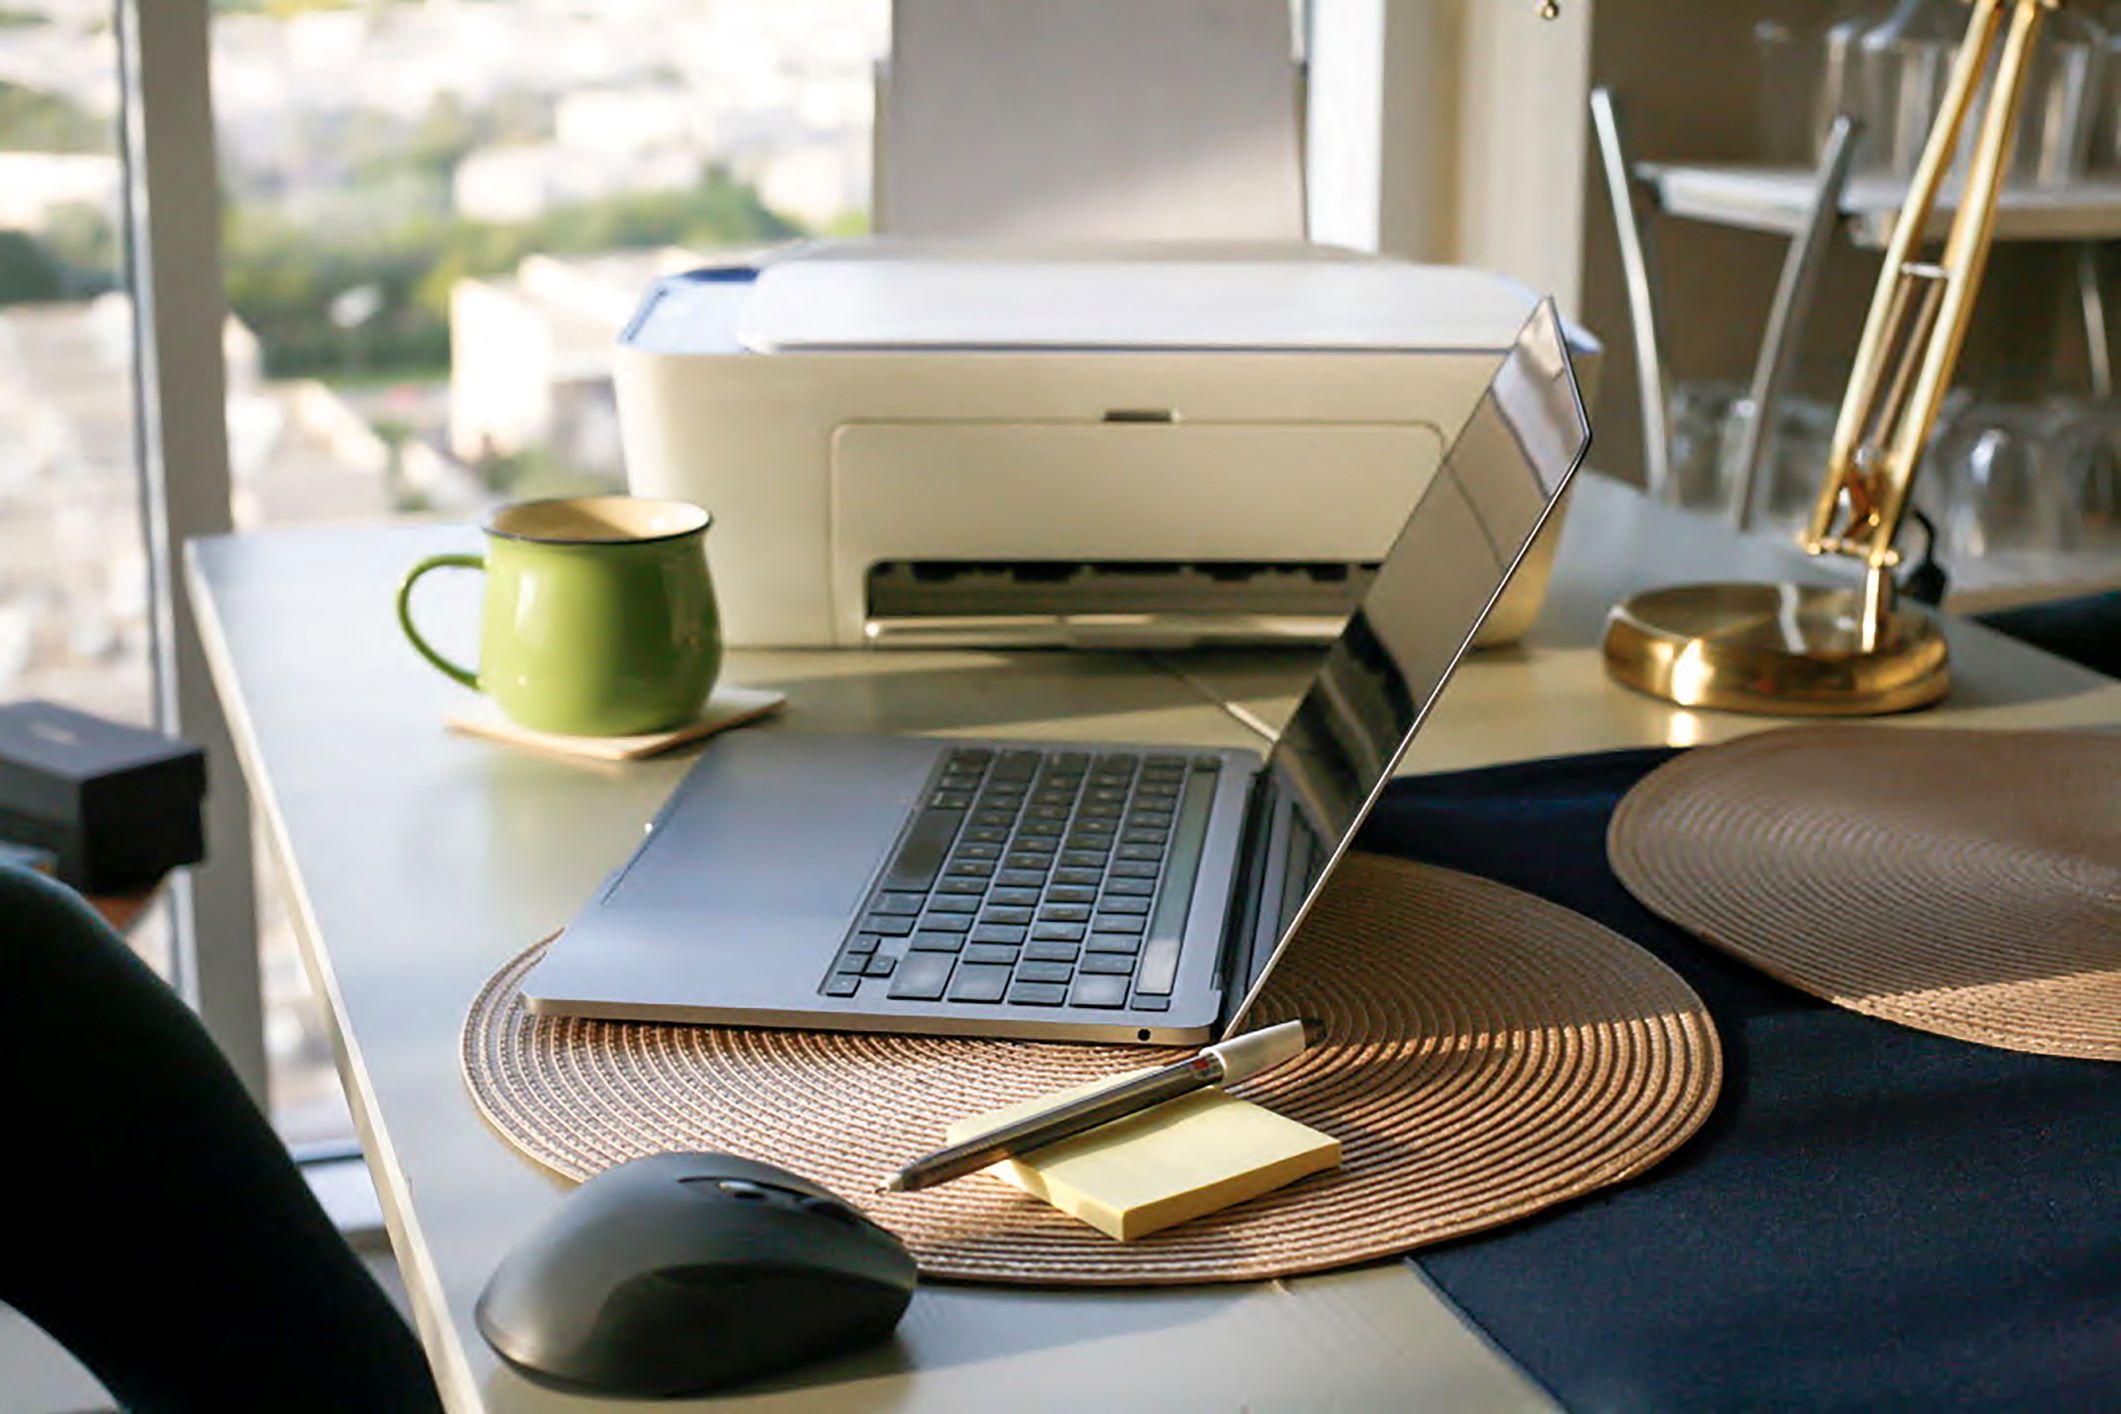 An office setup featuring a sleek laptop on a placemat, a business printer, a green mug, a wireless mouse, sticky notes with a pen, and a white printer on a desk with a city view from a window.